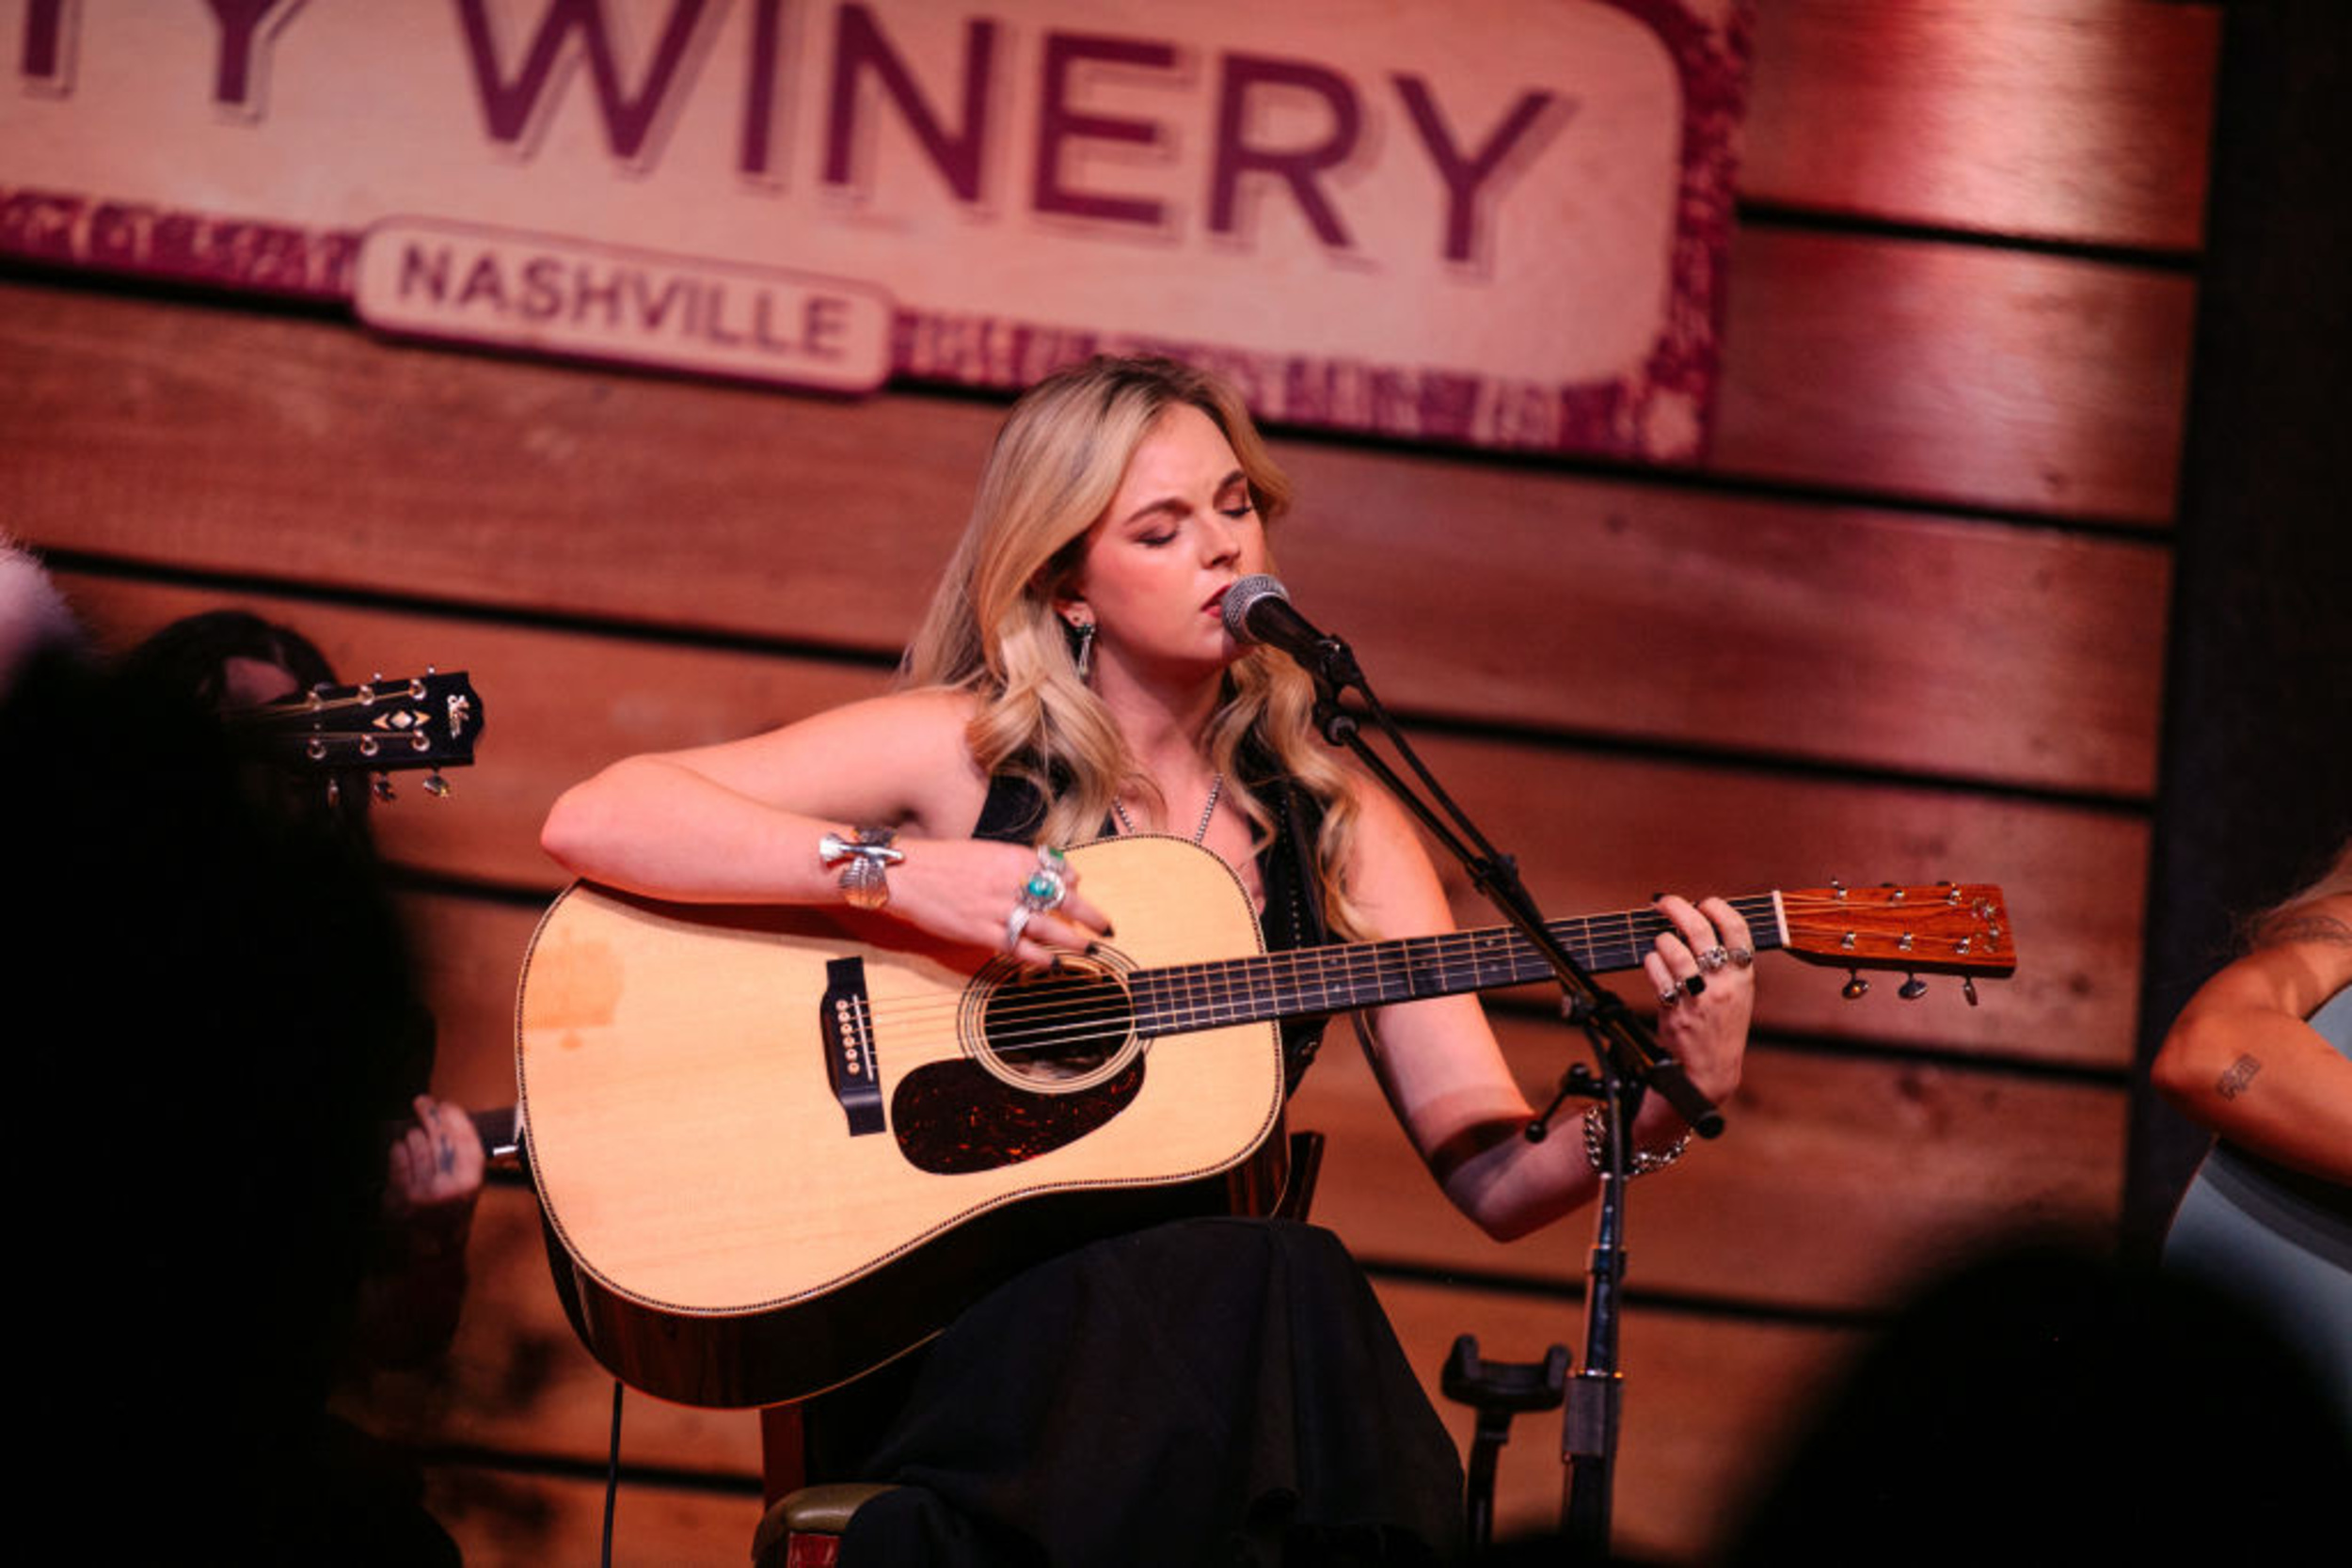 <p>After trying her hand at acting, Karley Scott Collins moved to Nashville in 2019 after she scored a publishing deal. In the years following, she's been writing and honing her sound, and the results are impressive. Listen to "Marlboro Reds" or "Heavy Metal" for an idea of her rock-inflected vibe. </p><p>You may also like: <a href='https://www.yardbarker.com/entertainment/articles/ranking_the_main_cast_of_stranger_things_from_totally_rad_to_maybe_they_should_be_in_the_upside_down_030824/s1__40021447'>Ranking the main cast of 'Stranger Things,' from totally rad to maybe they should be in the Upside Down</a></p>